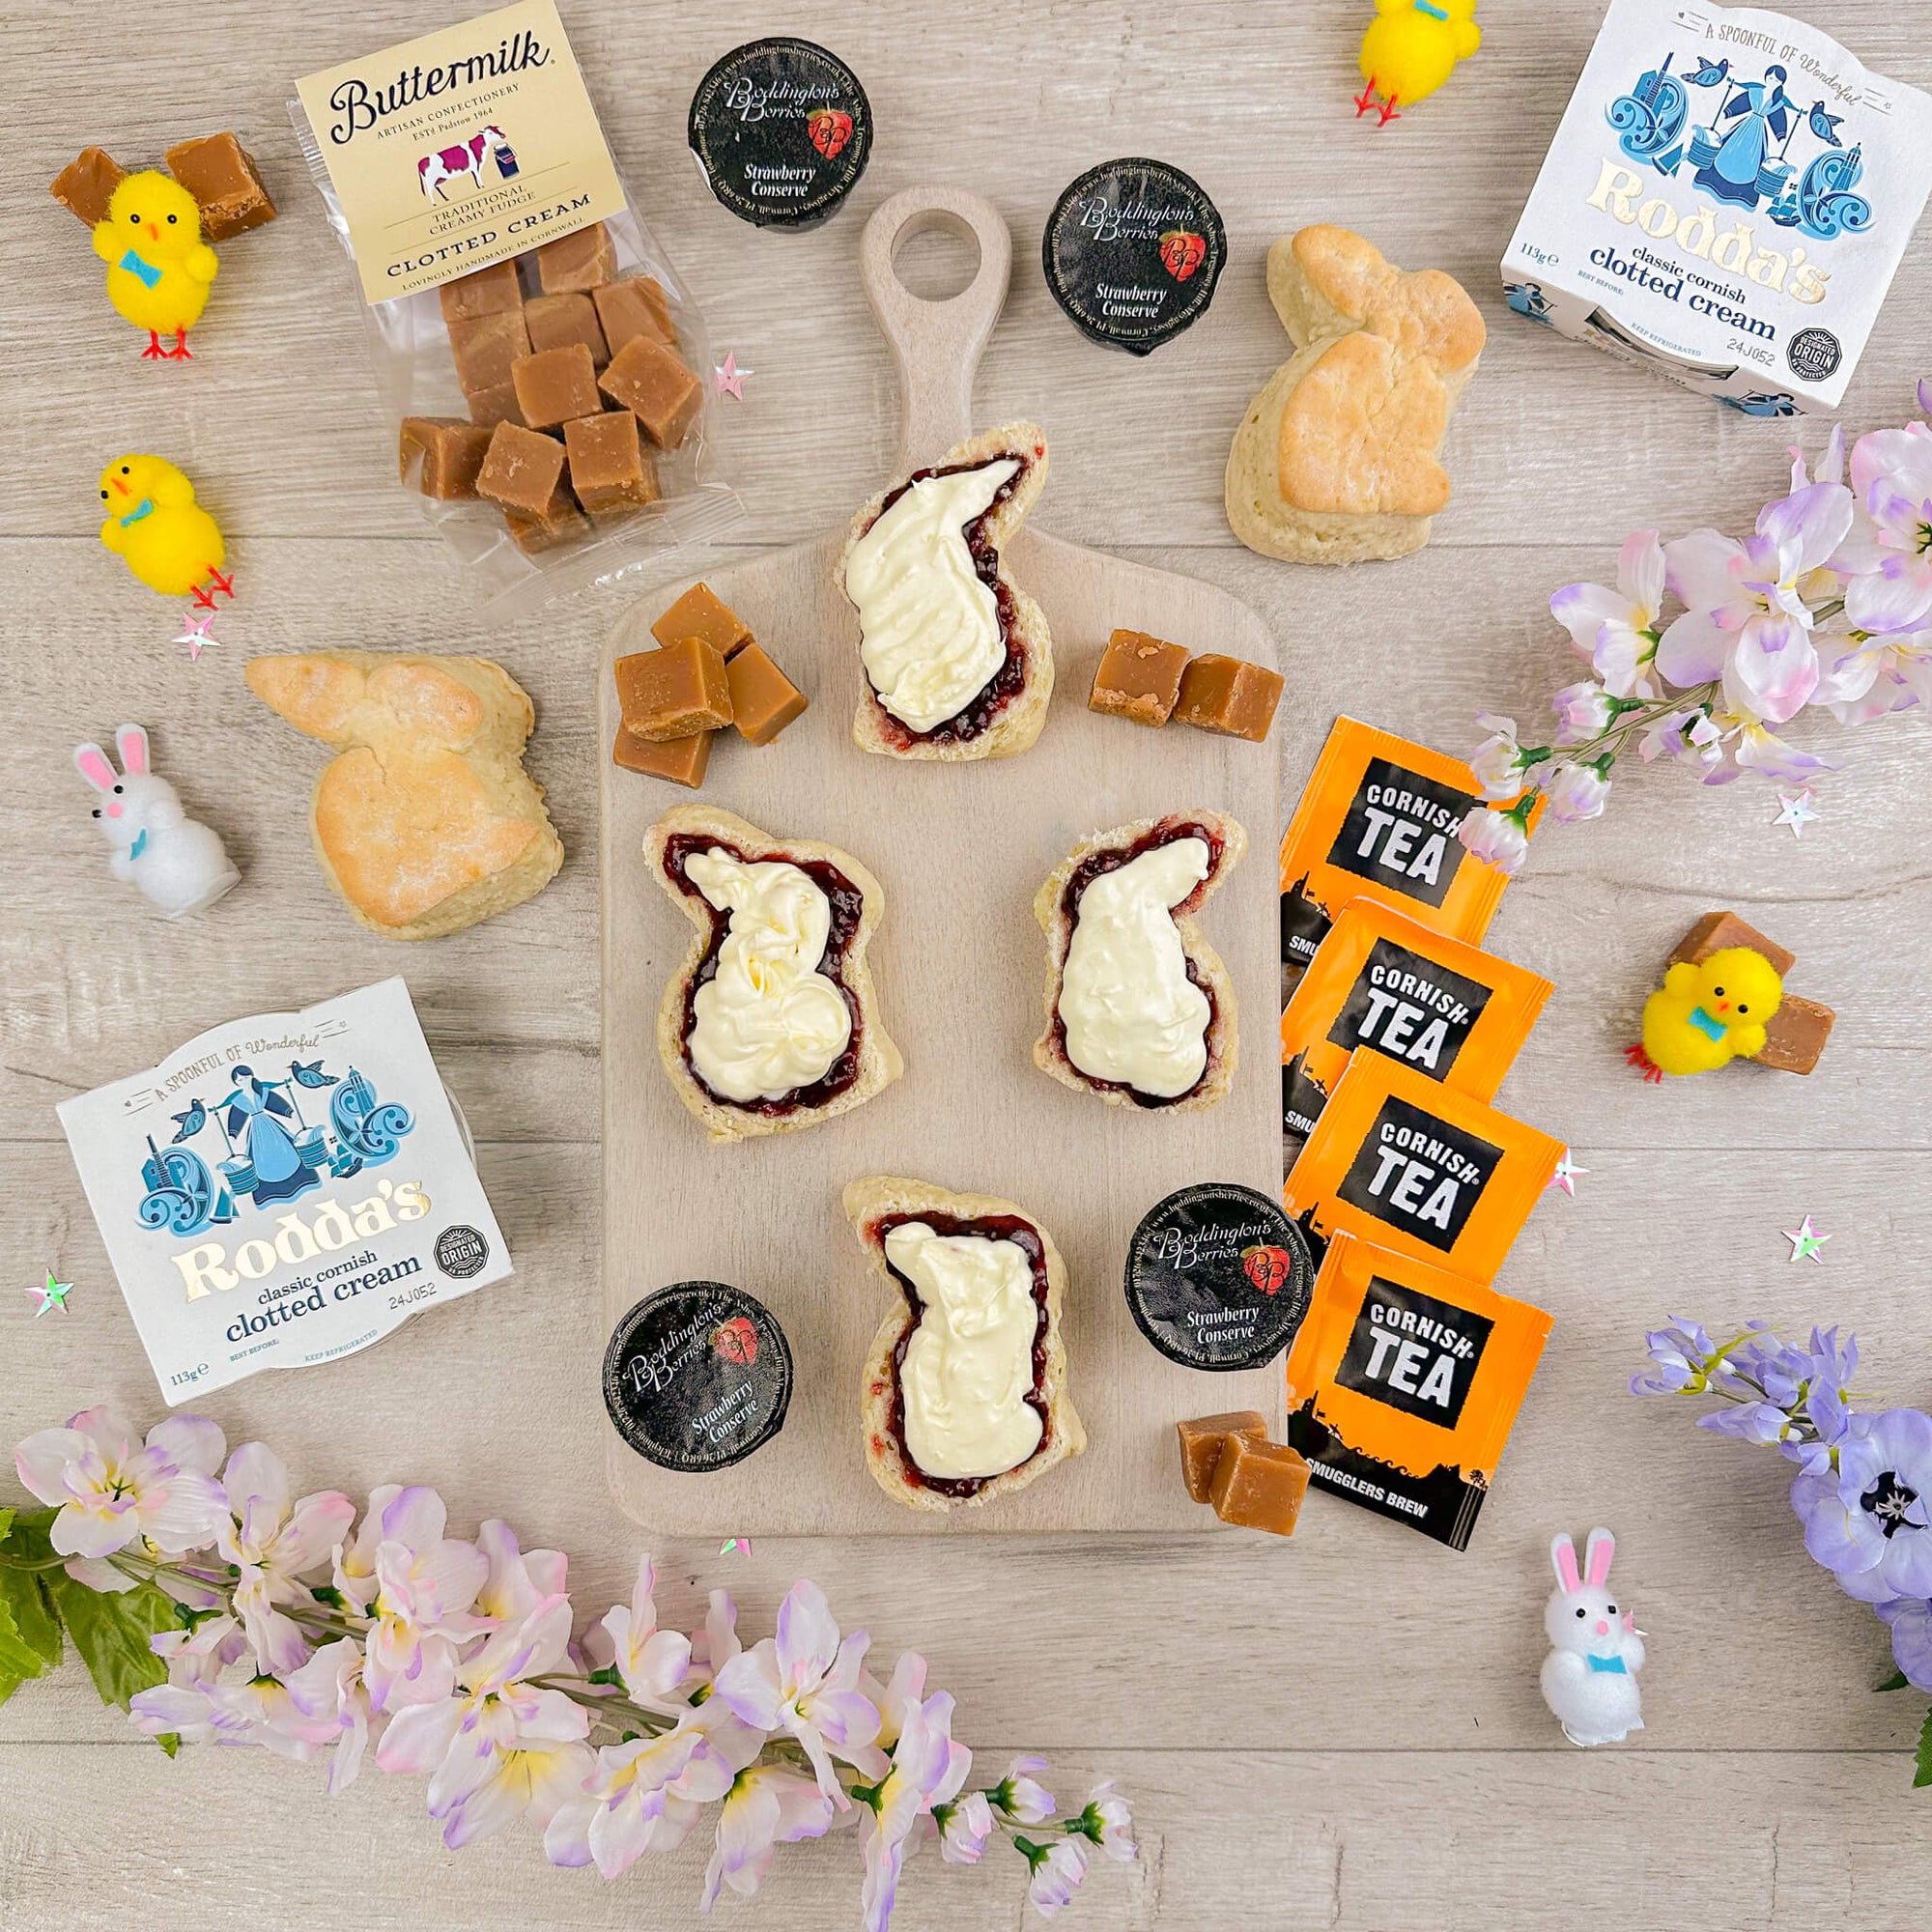 Egg-citing Easter Treats: Dive into Our Cream Tea Hampers Today